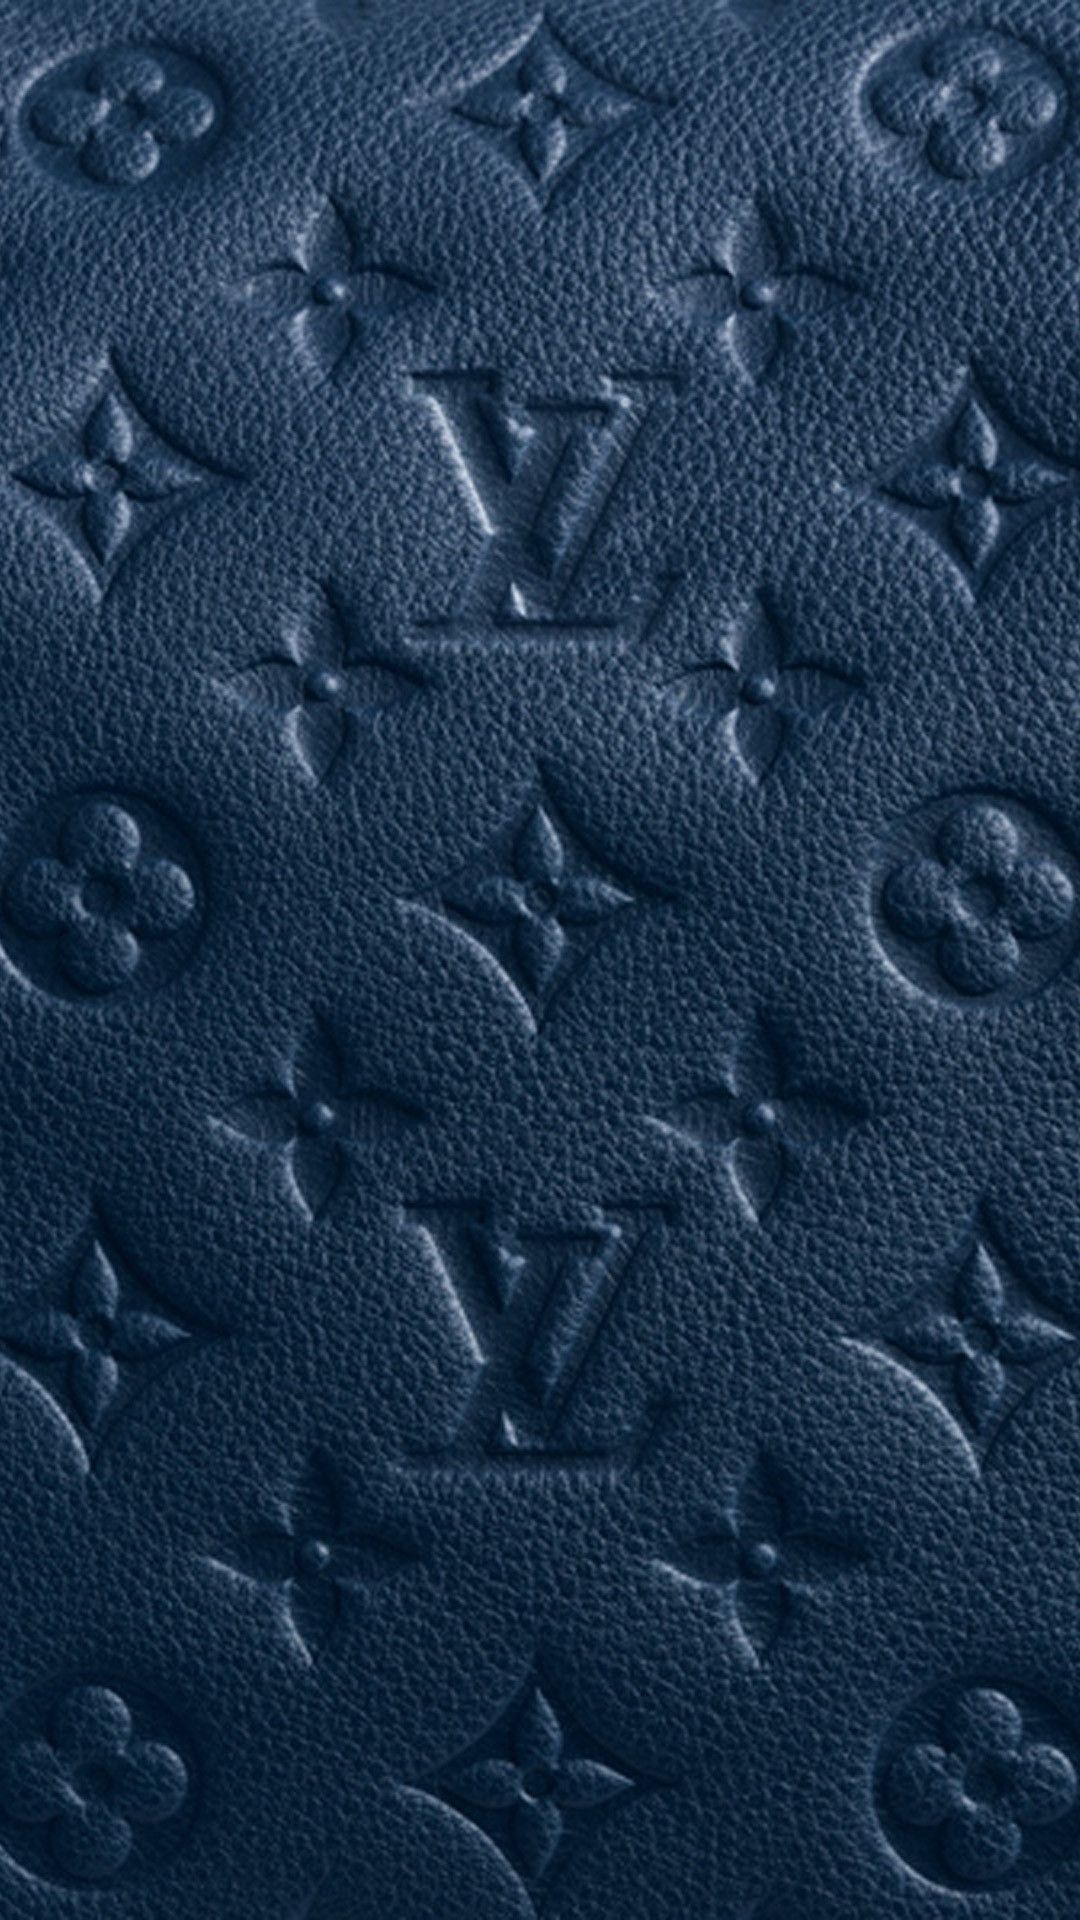 Louis Vuitton Wallpaper Hyper Realistic and Intricate · Creative Fabrica